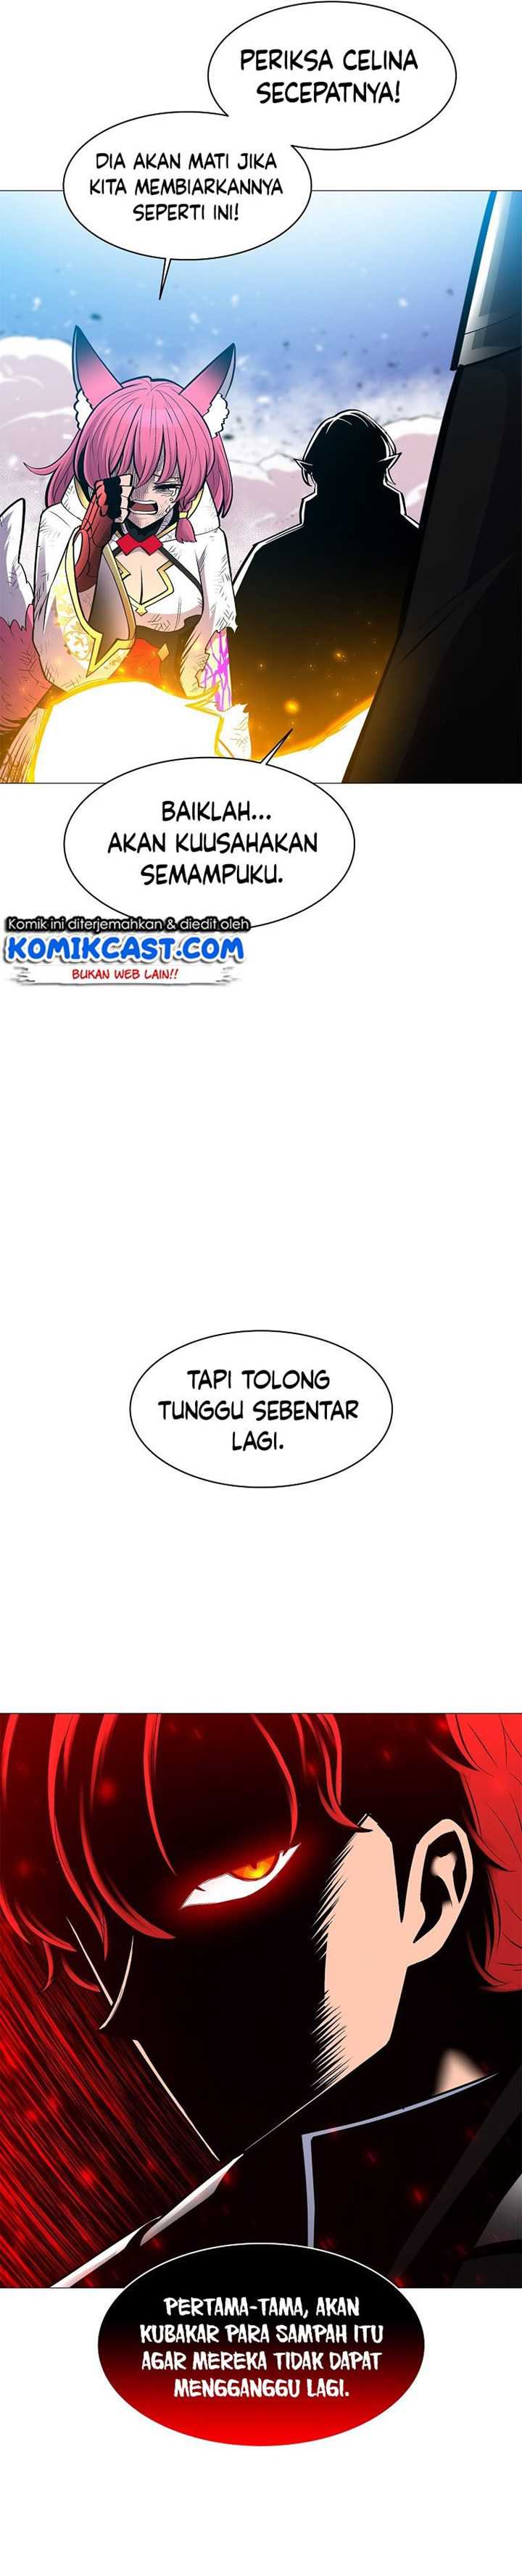 Updater Chapter 79 - 215